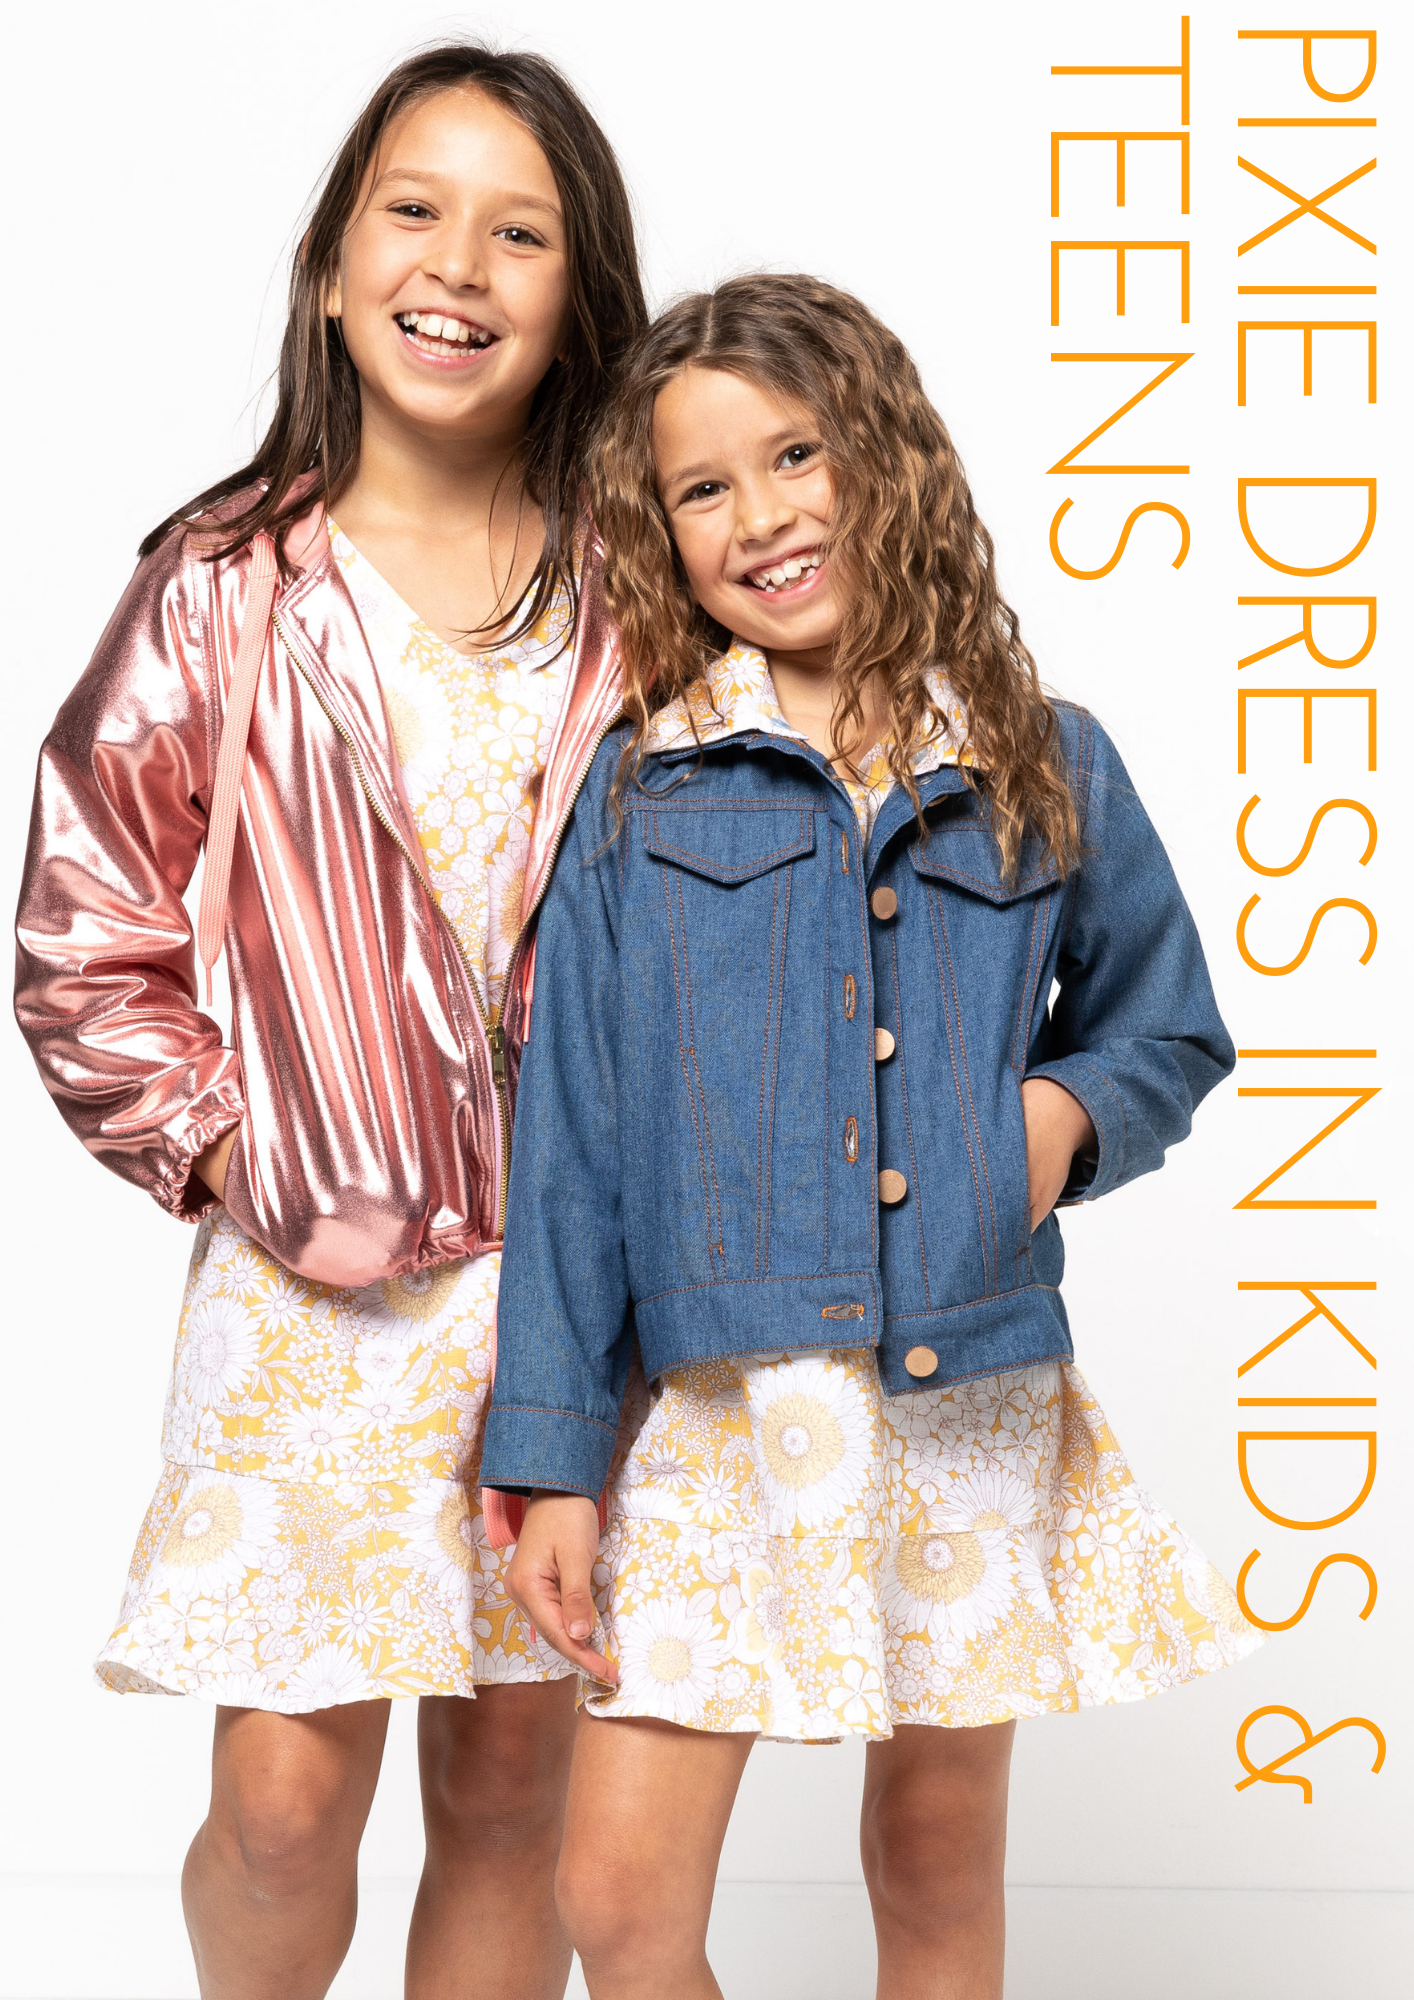 New Pattern Release - Pixie Kids & Teens Dress out now! 